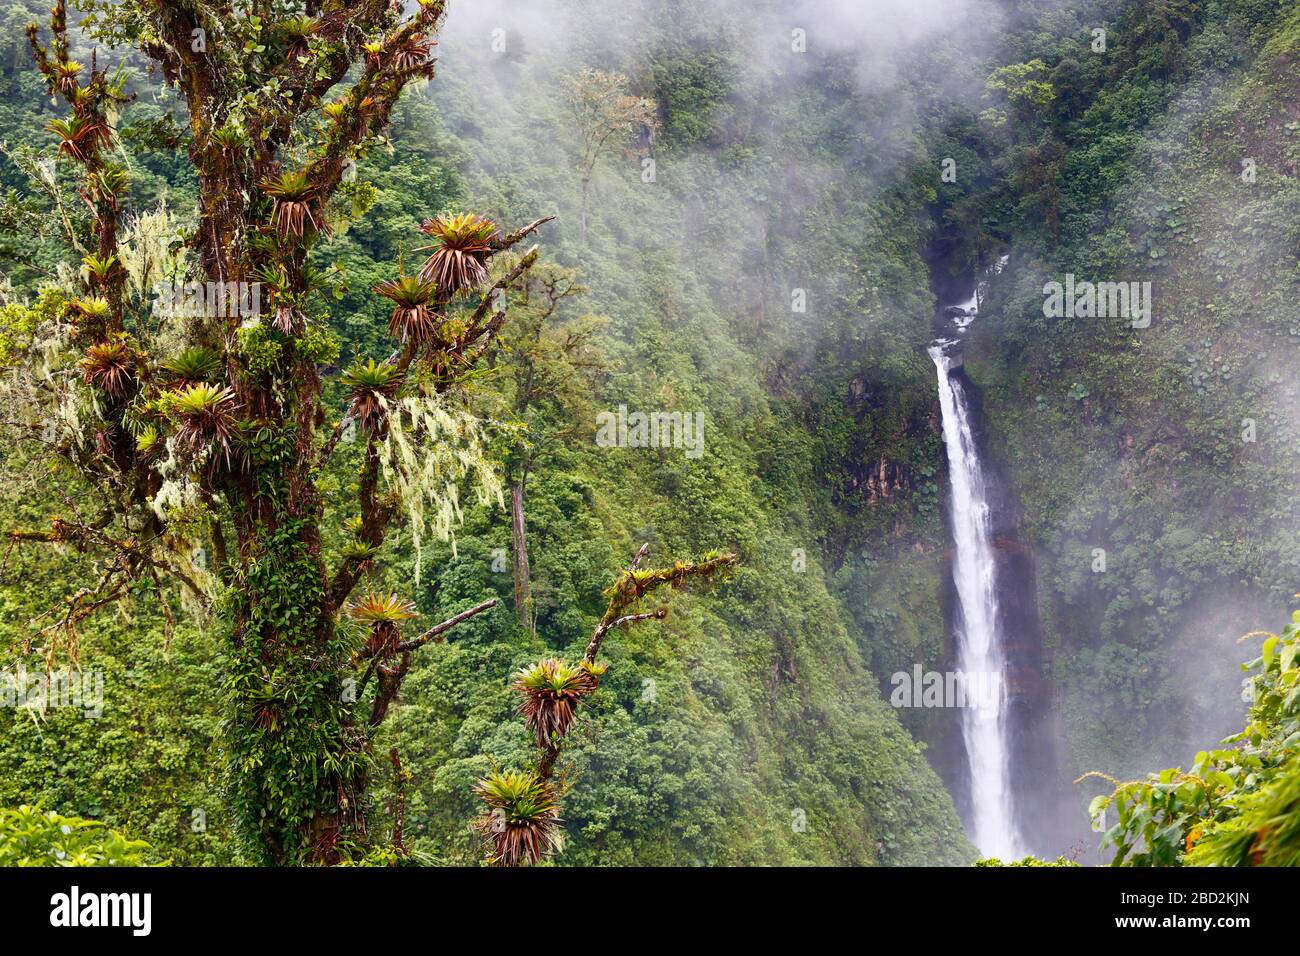 A wide shot of a waterfall in the cloud forest of Costa Rica, with a dead tree covered in bromeliads in the foreground. Stock Photo